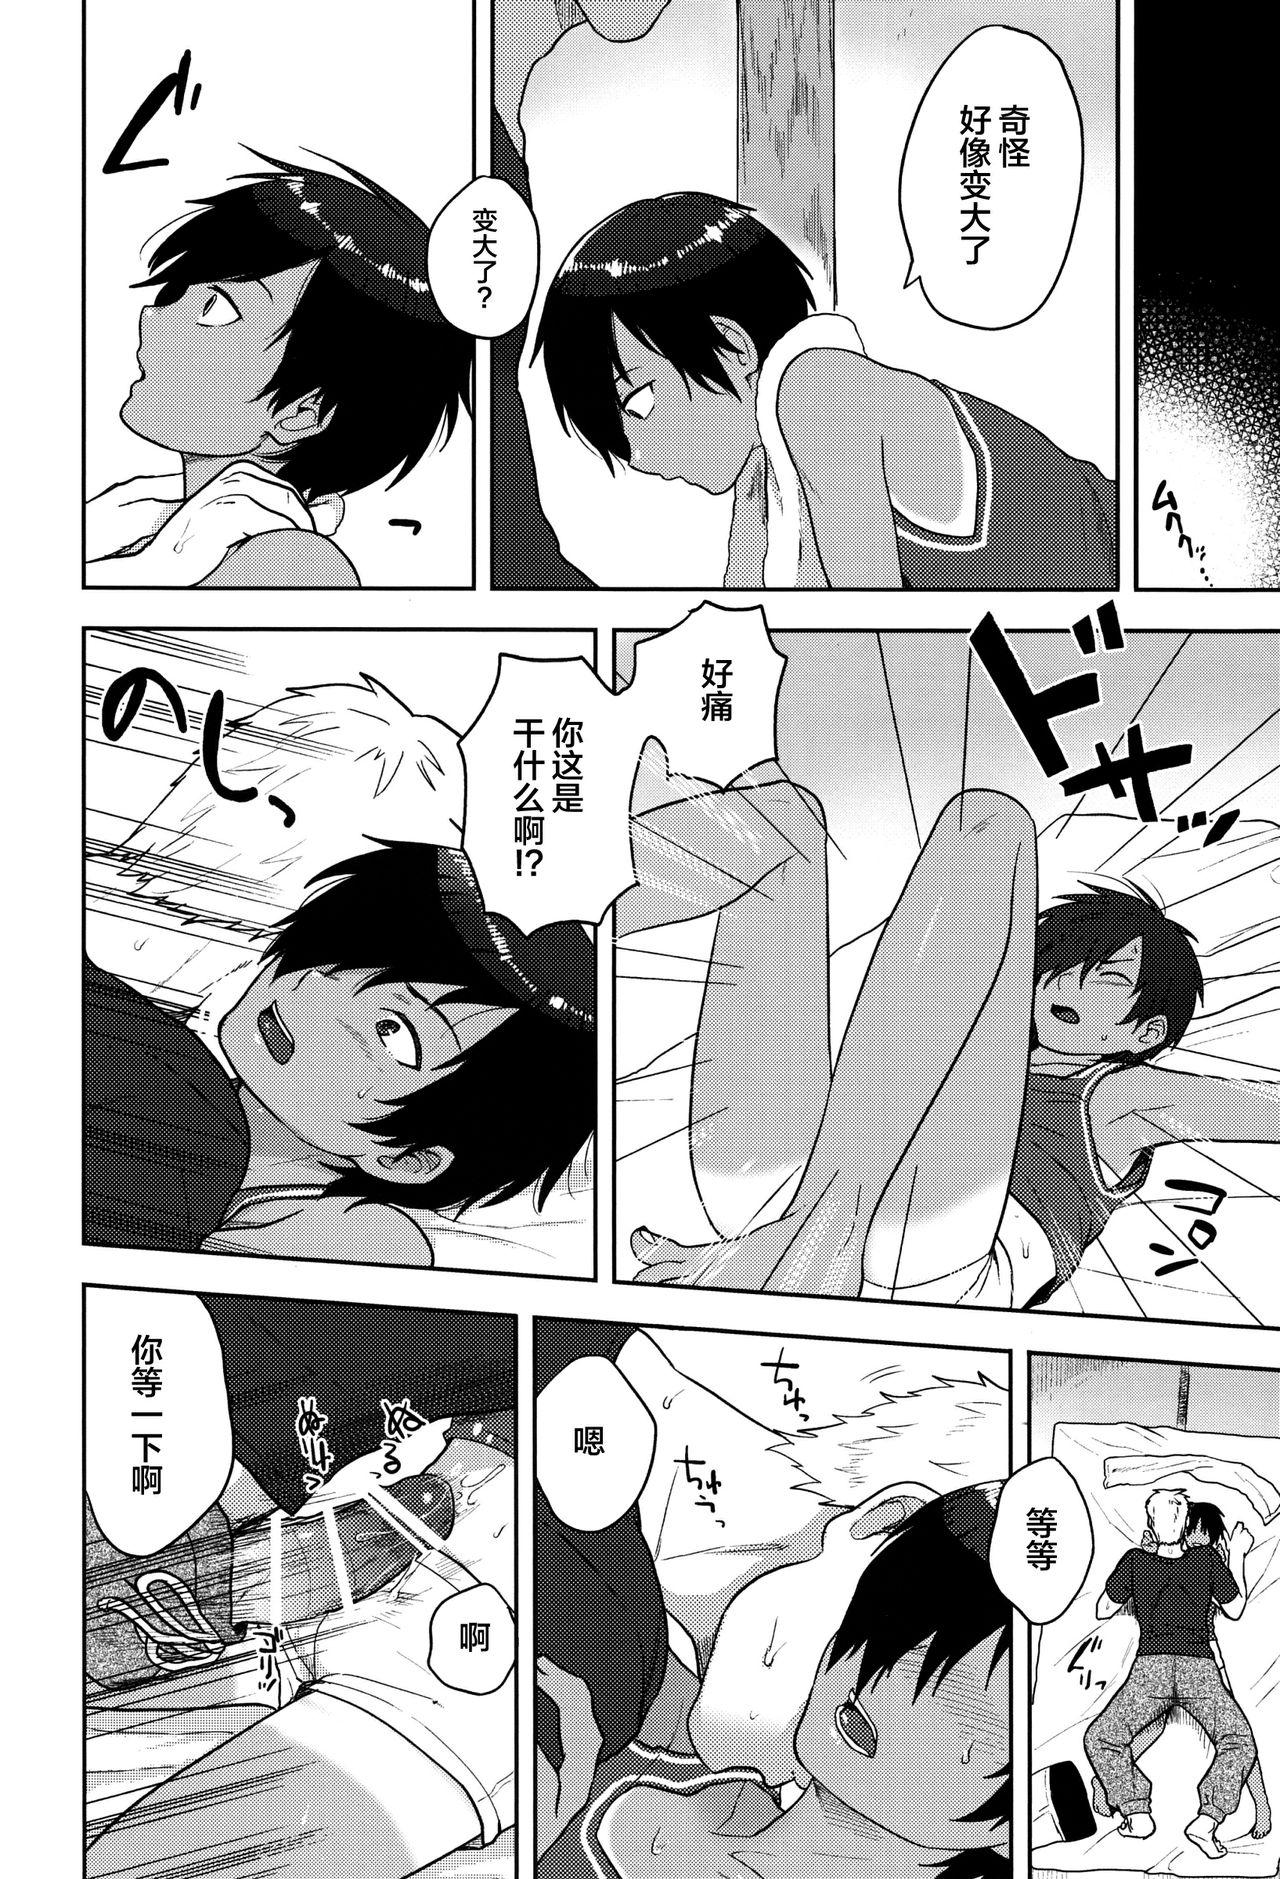 Groupsex DKY - Summer wars Eating Pussy - Page 9